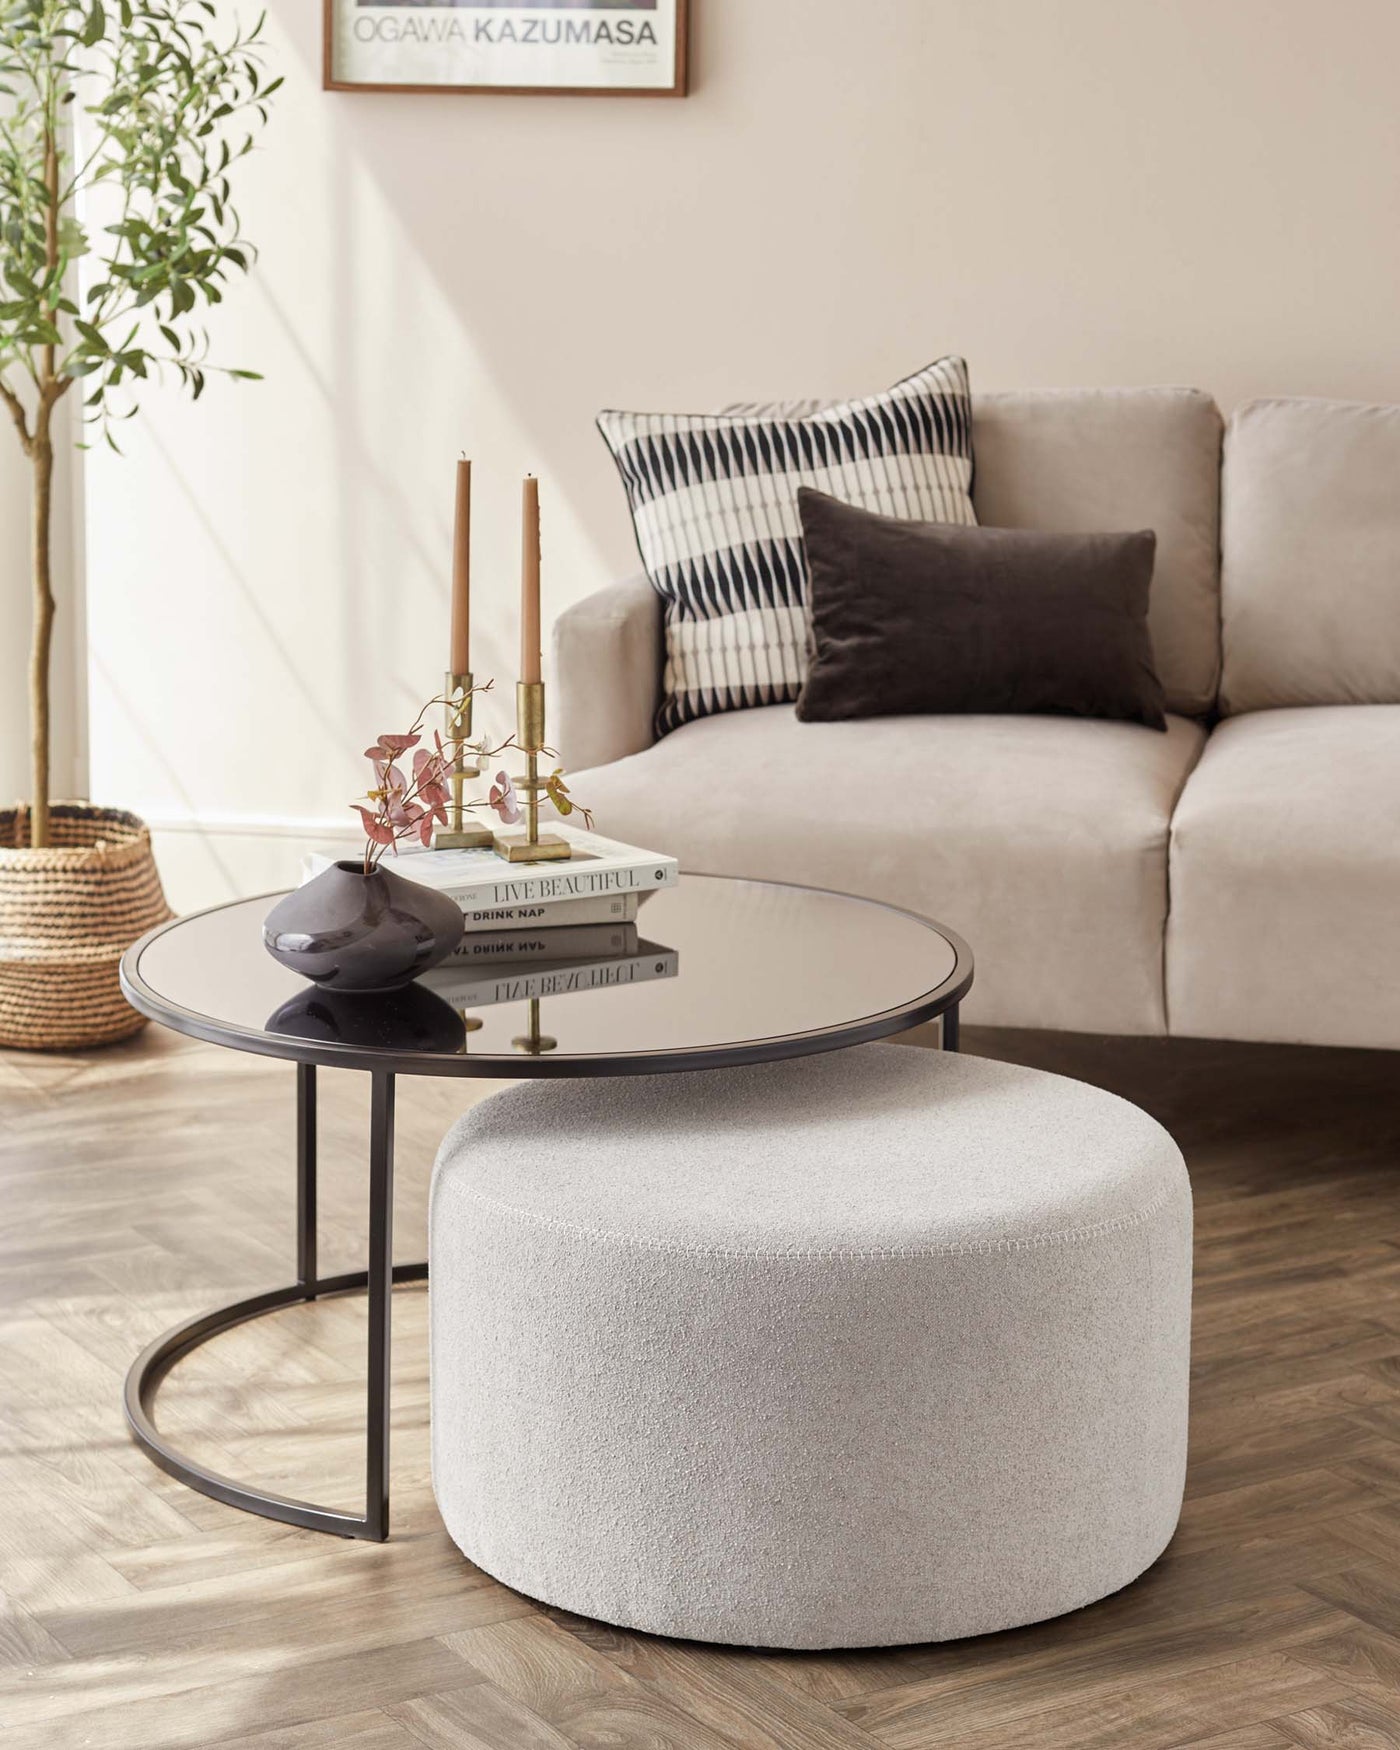 Contemporary living room featuring a light beige corner sofa with assorted throw pillows, a round glass-topped coffee table with a sleek black metal frame, and a round, fabric-upholstered ottoman in light grey. The setup is complemented by soft natural light and indoor greenery.